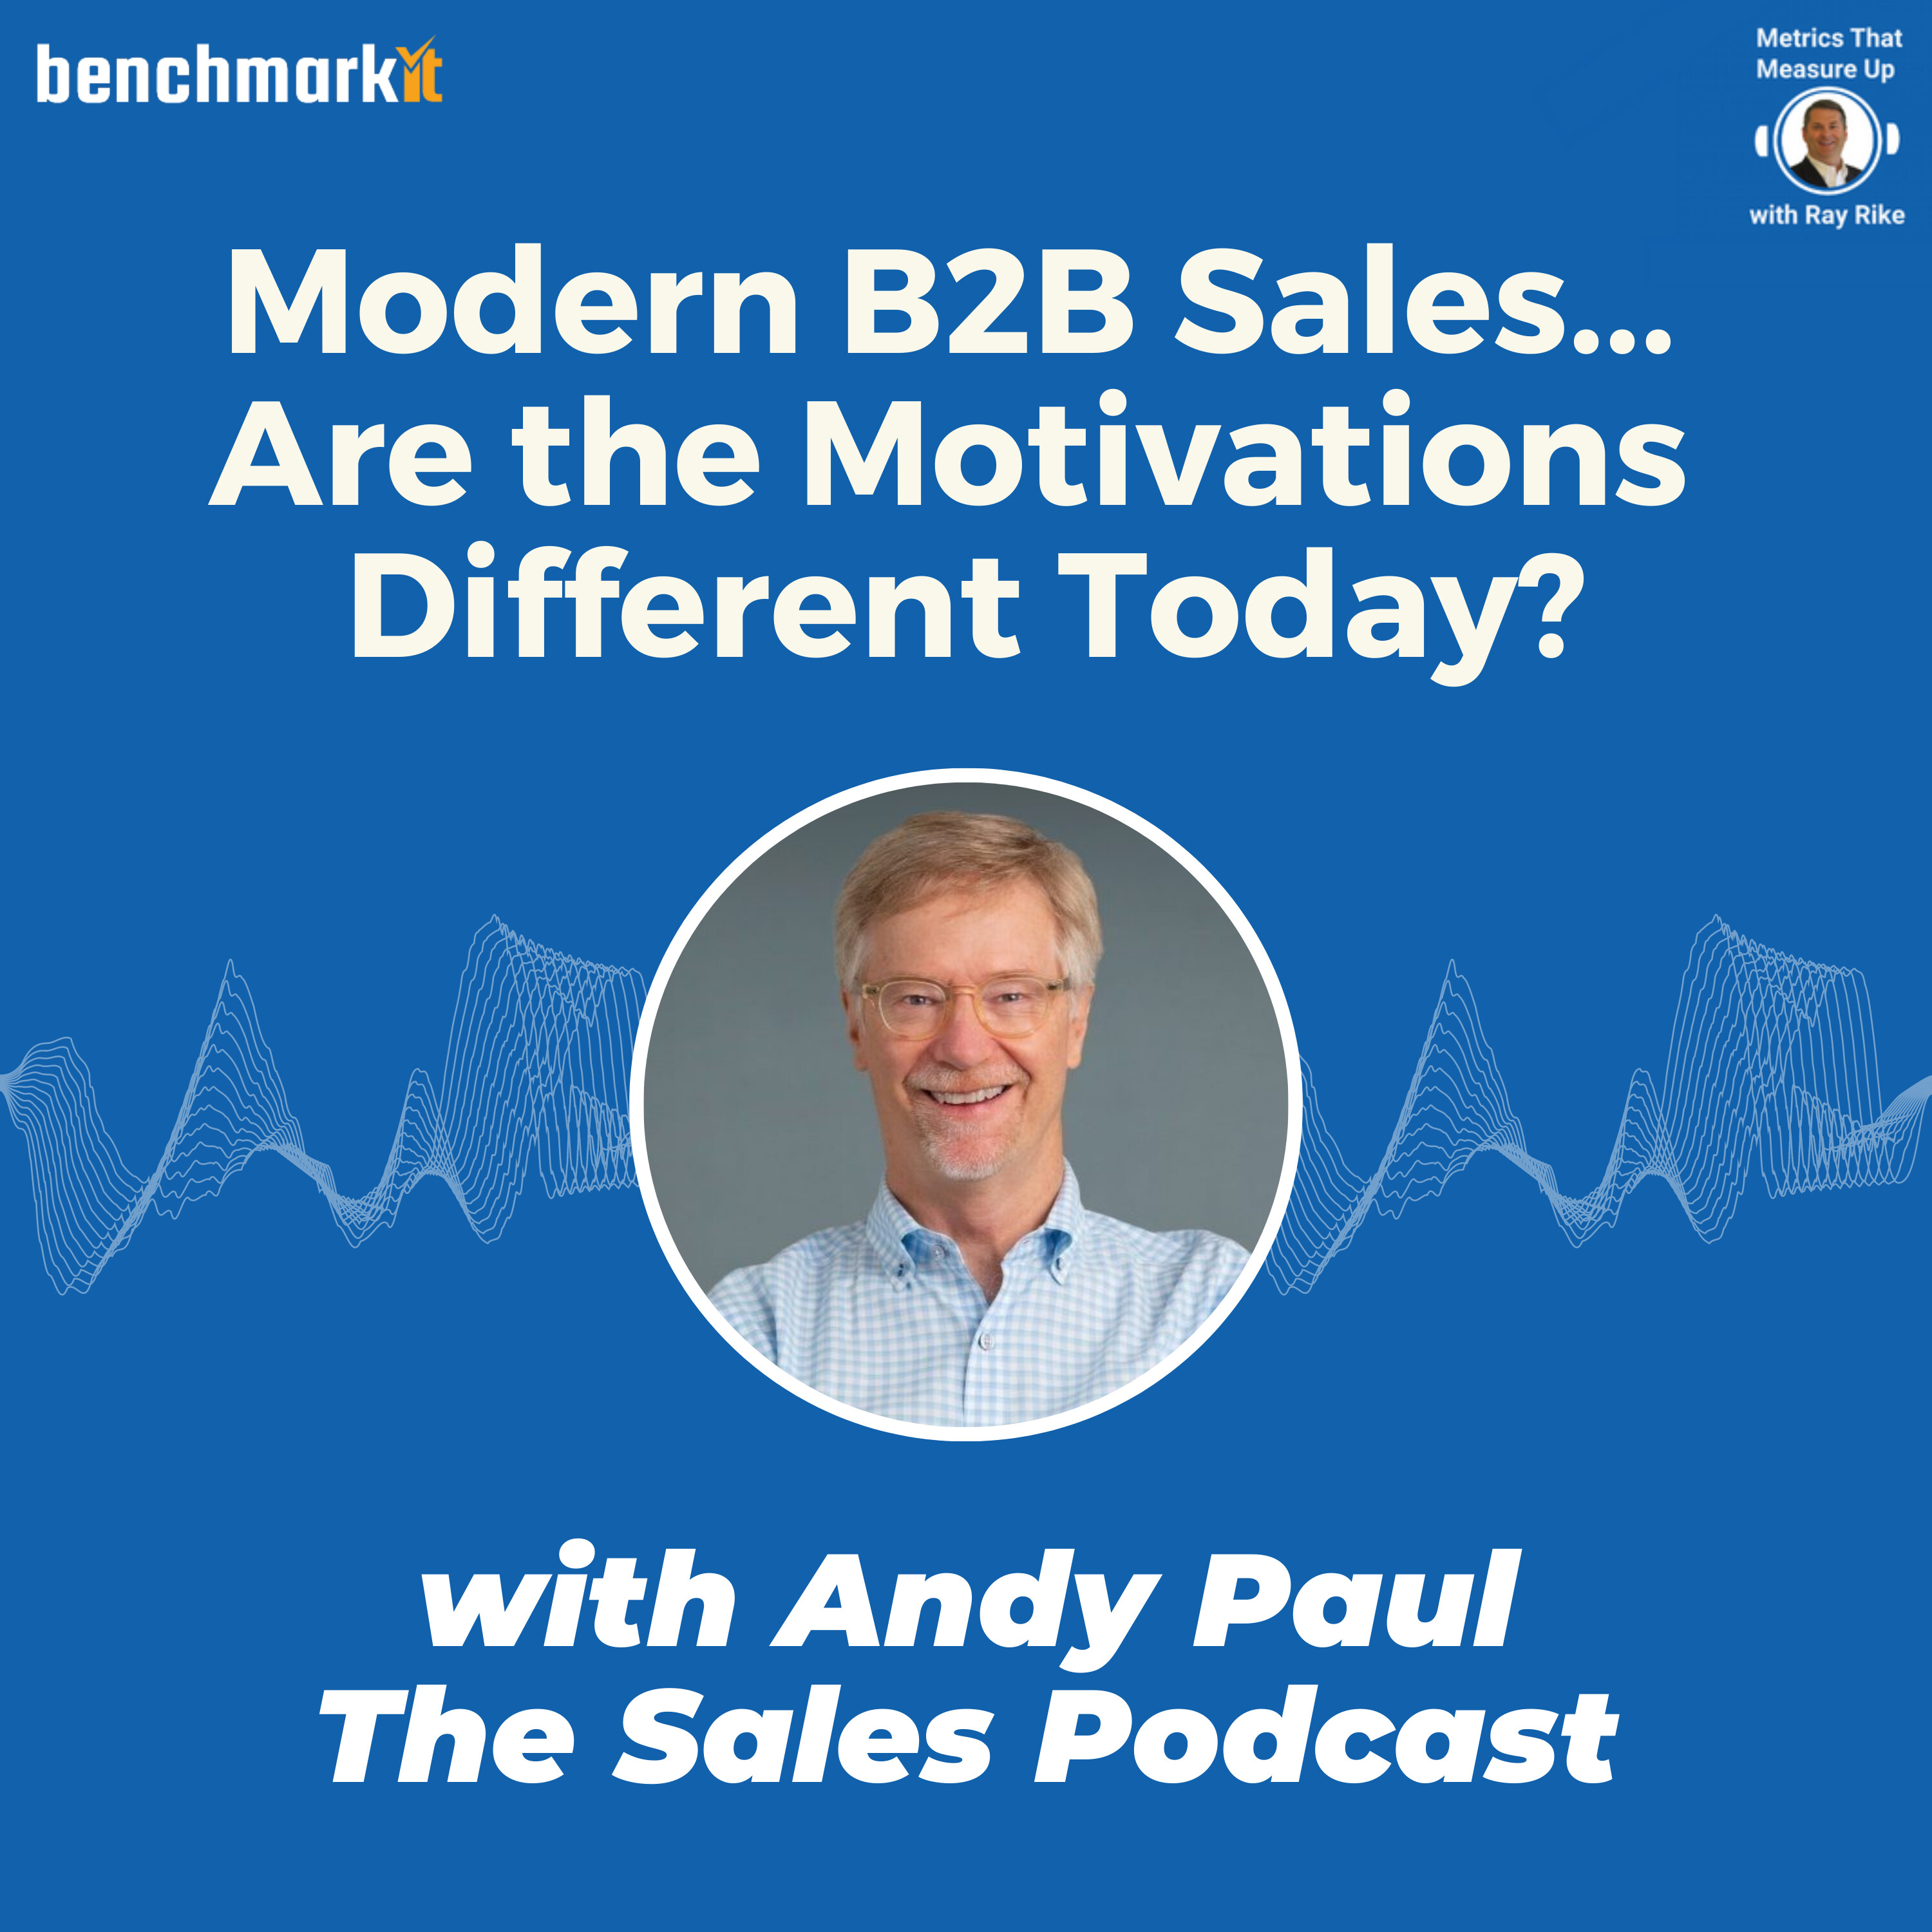 Modern B2B Selling - Are the motivations different today?  - with Andy Paul, RingDNA